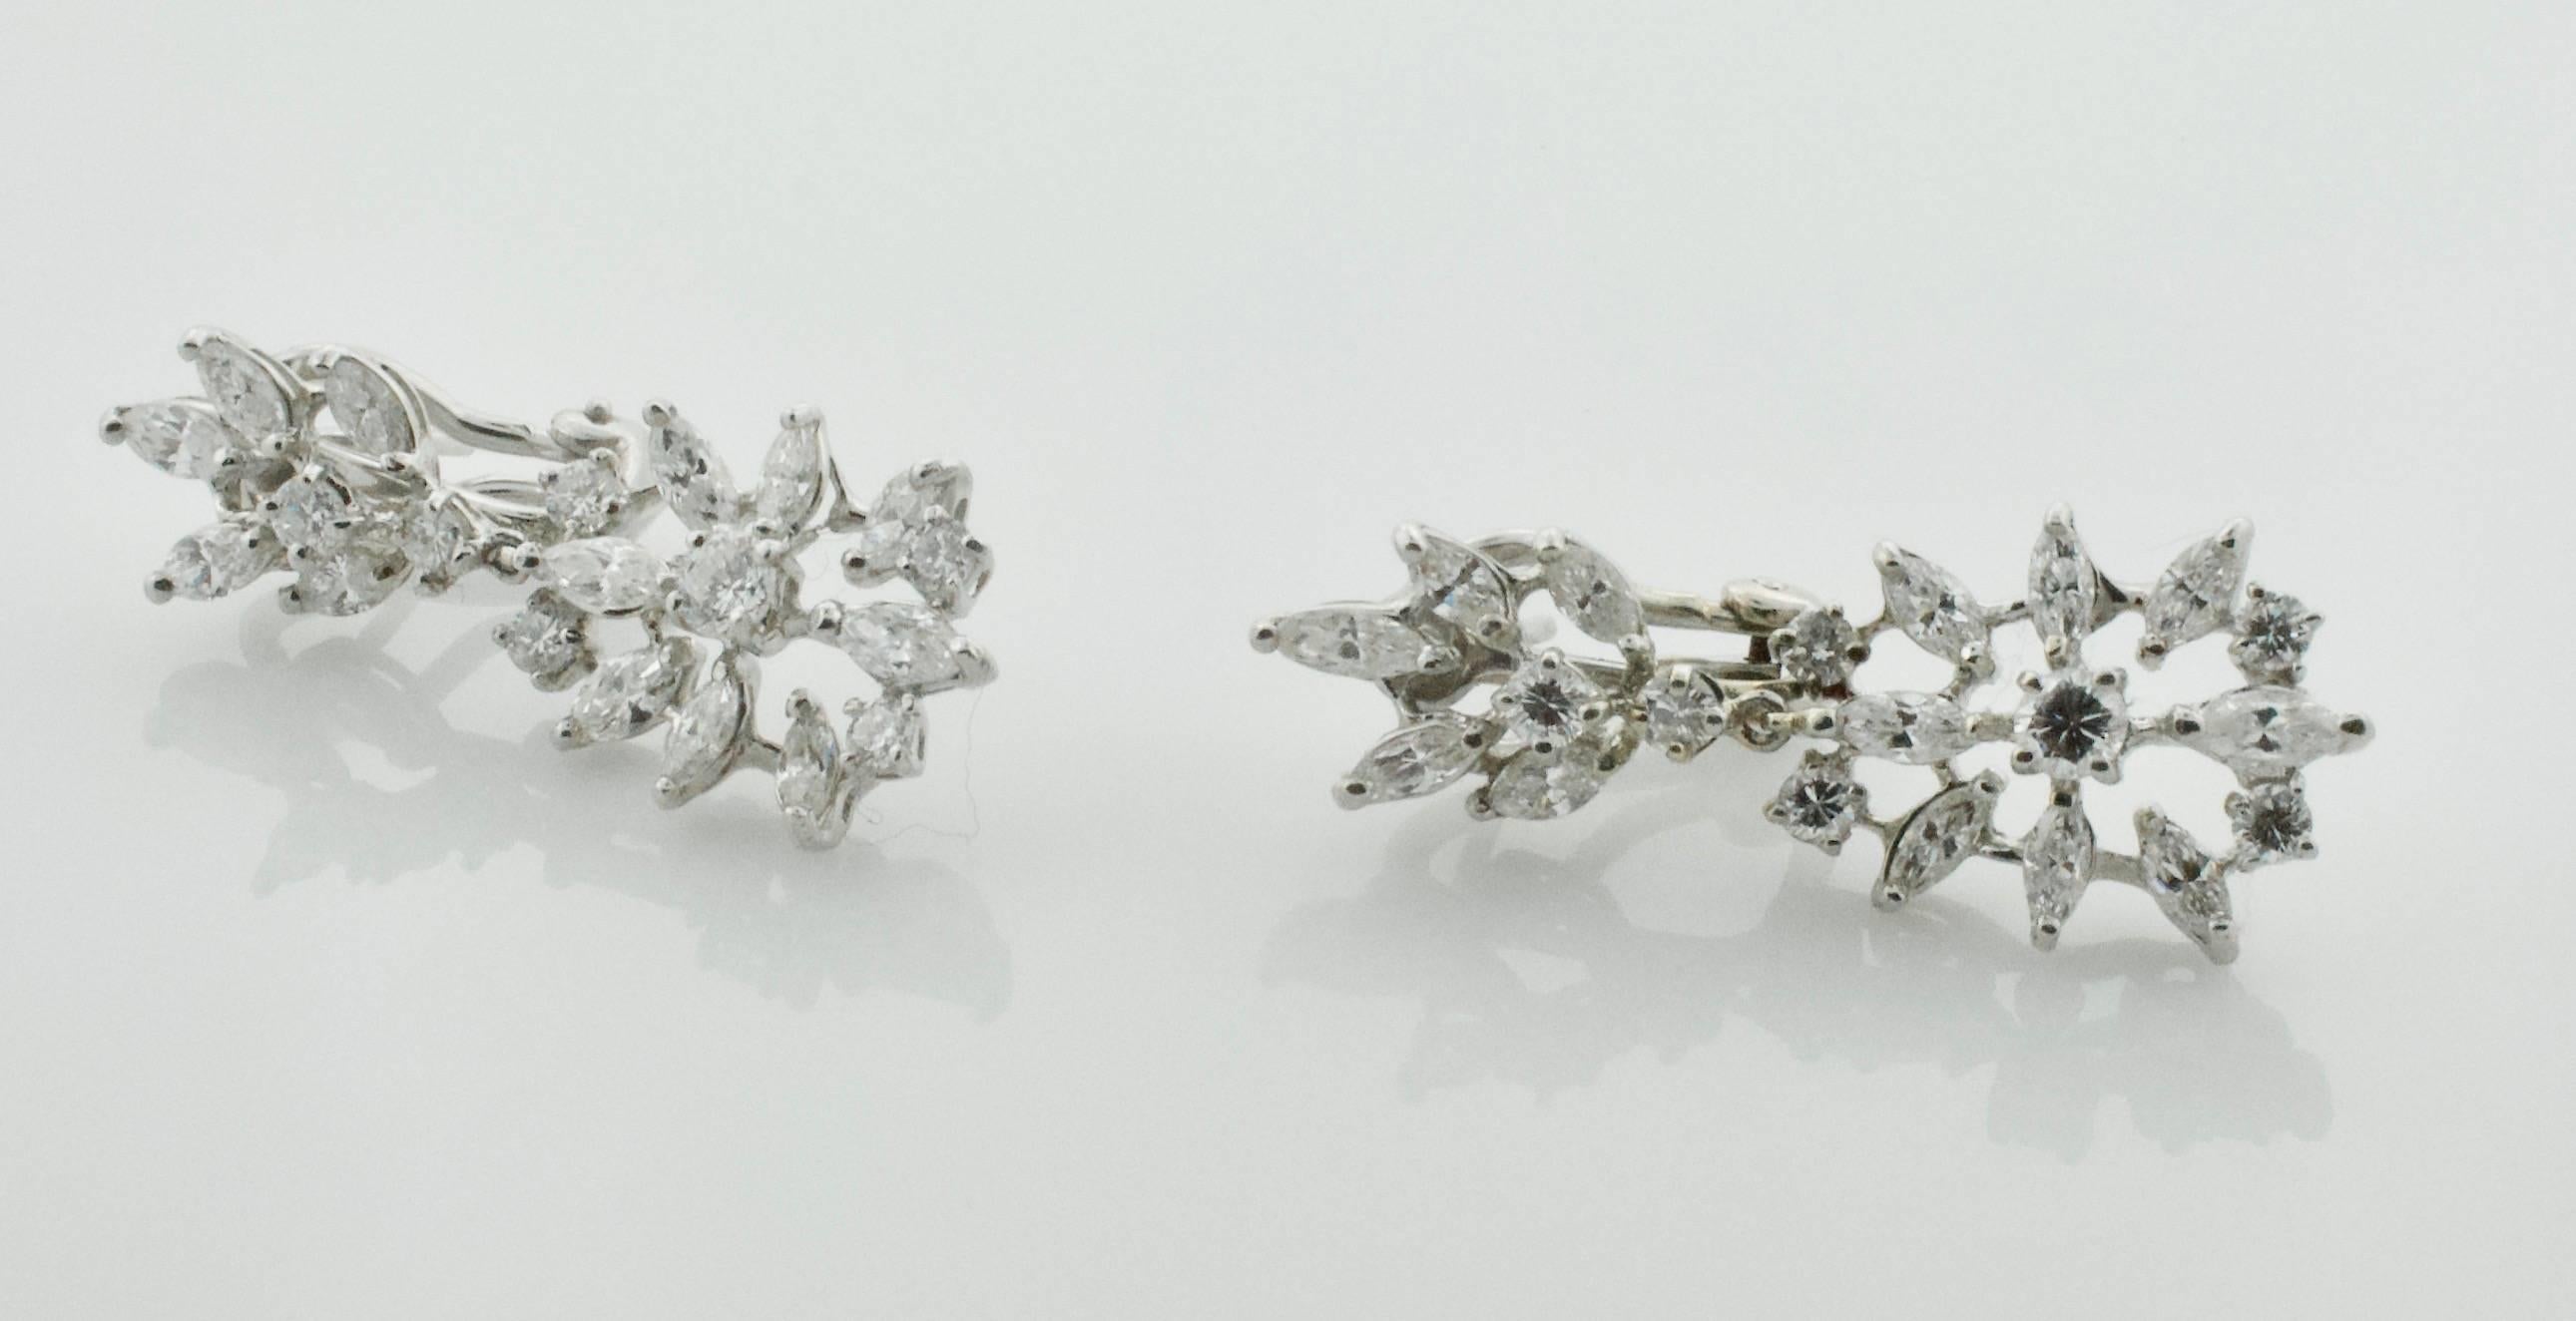 Dangling Diamond Earrings 2.90 carats Circa 1950's
Introducing our exquisite Dangling Diamond Earrings from the 1950s, boasting a total carat weight of 2.90. These earrings feature a timeless design, perfect for adding a touch of elegance to any